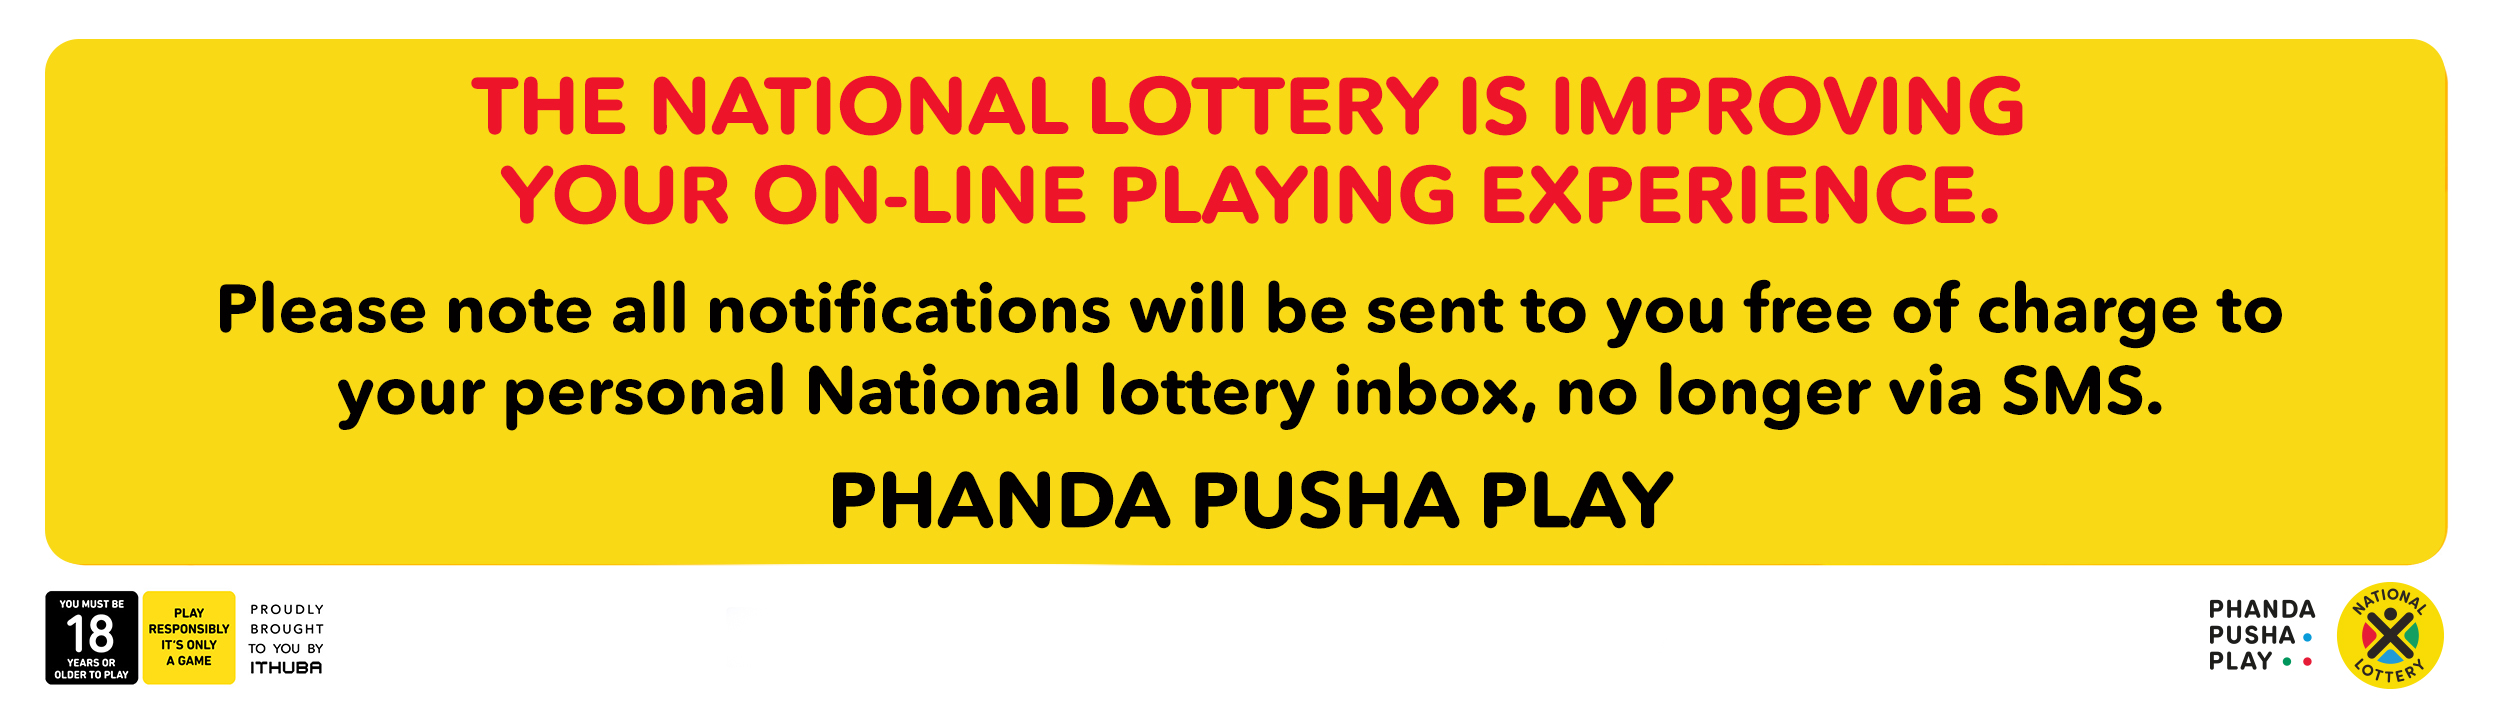 today's estimated lotto jackpot